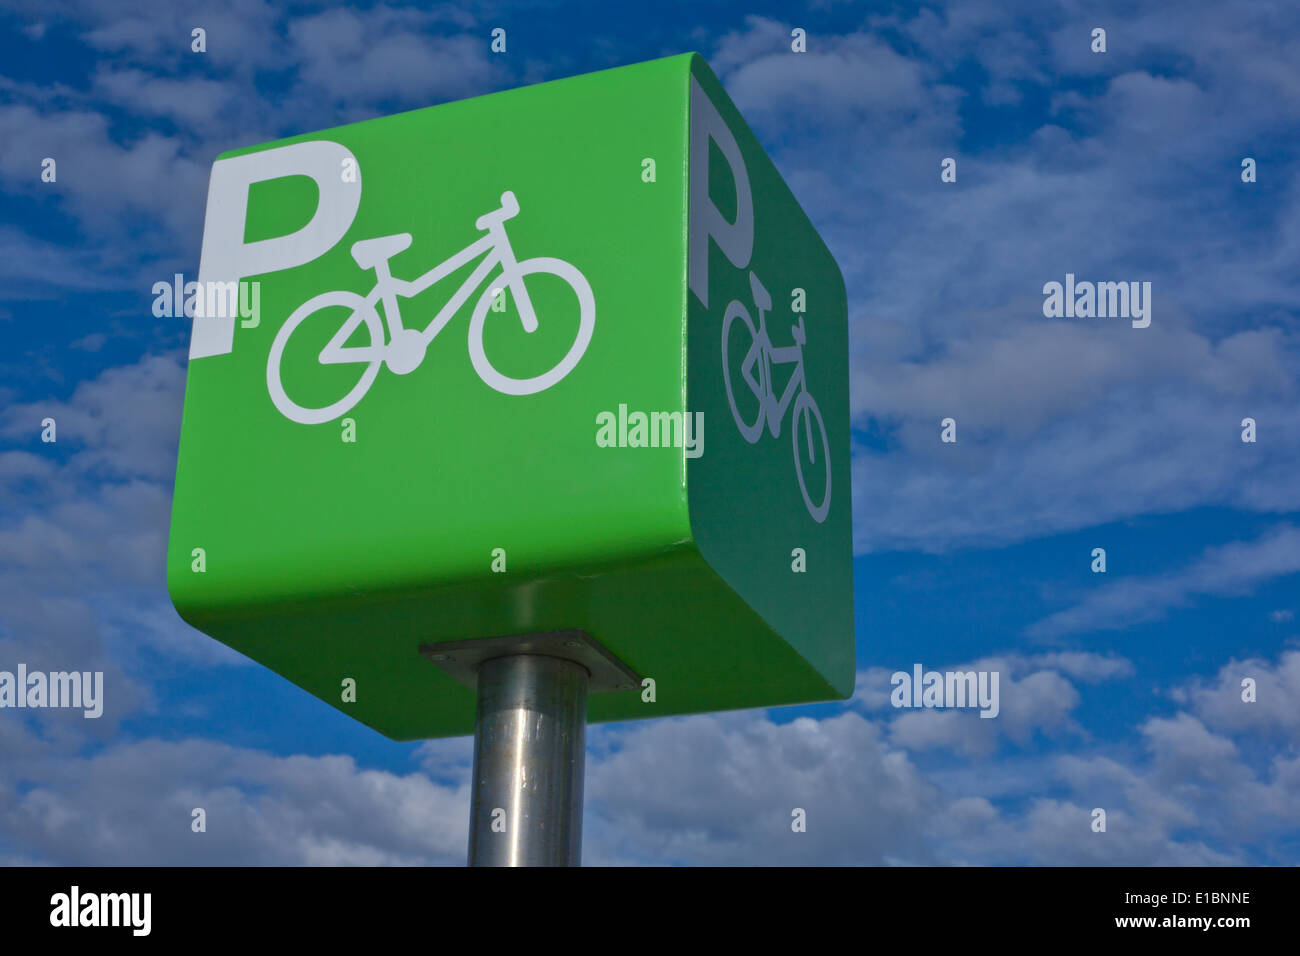 Green parking bicycle pole sign iver blue cloudy sky background Stock Photo